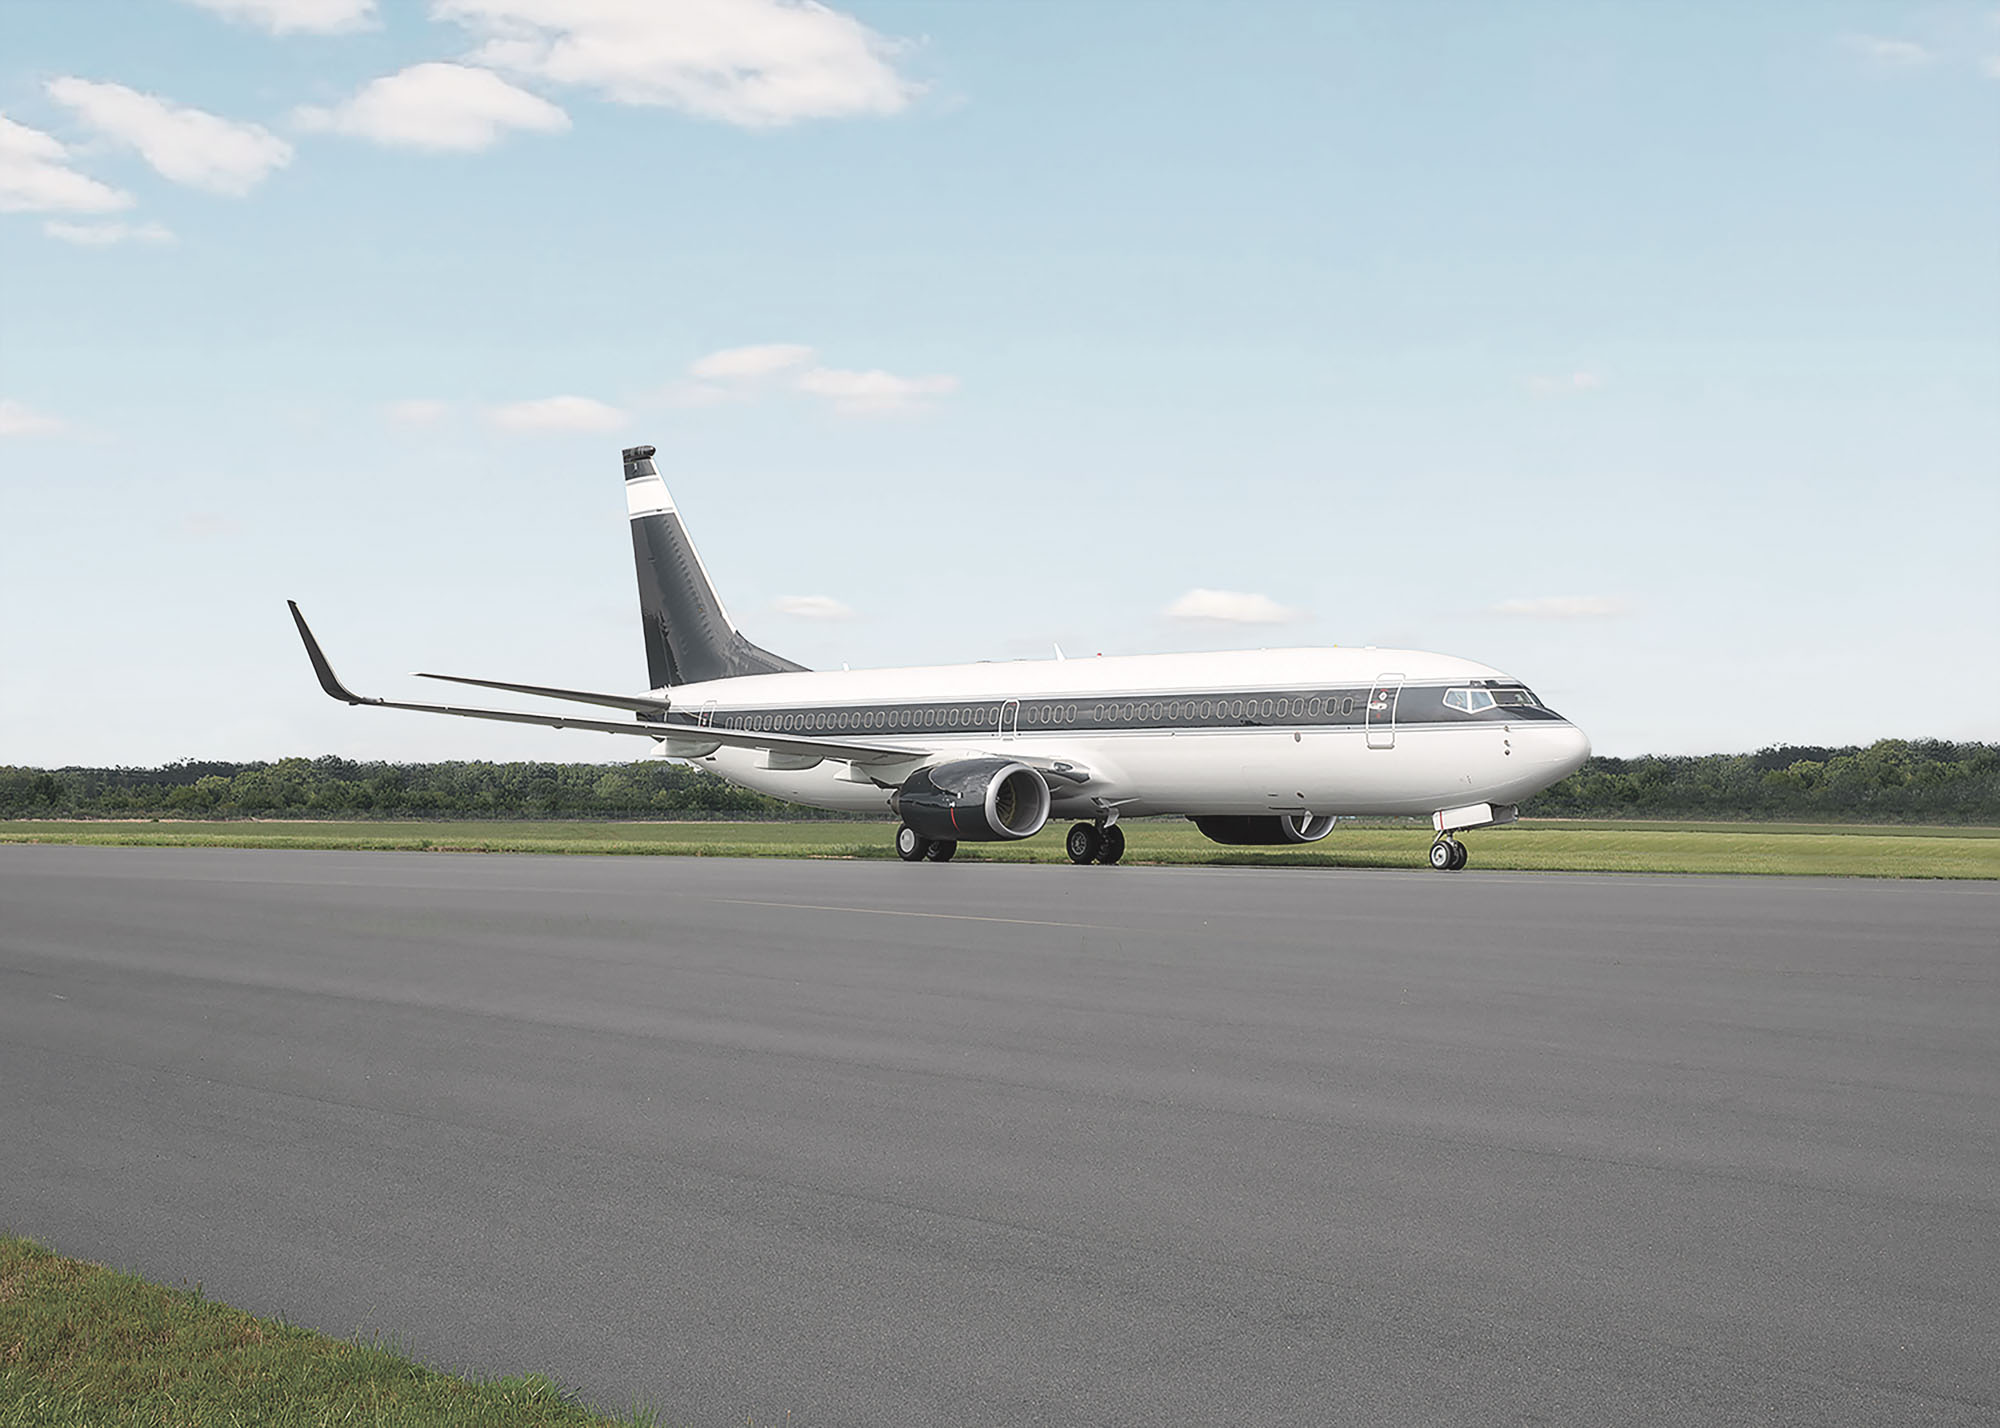 BBJ2 private charter jet on the runway